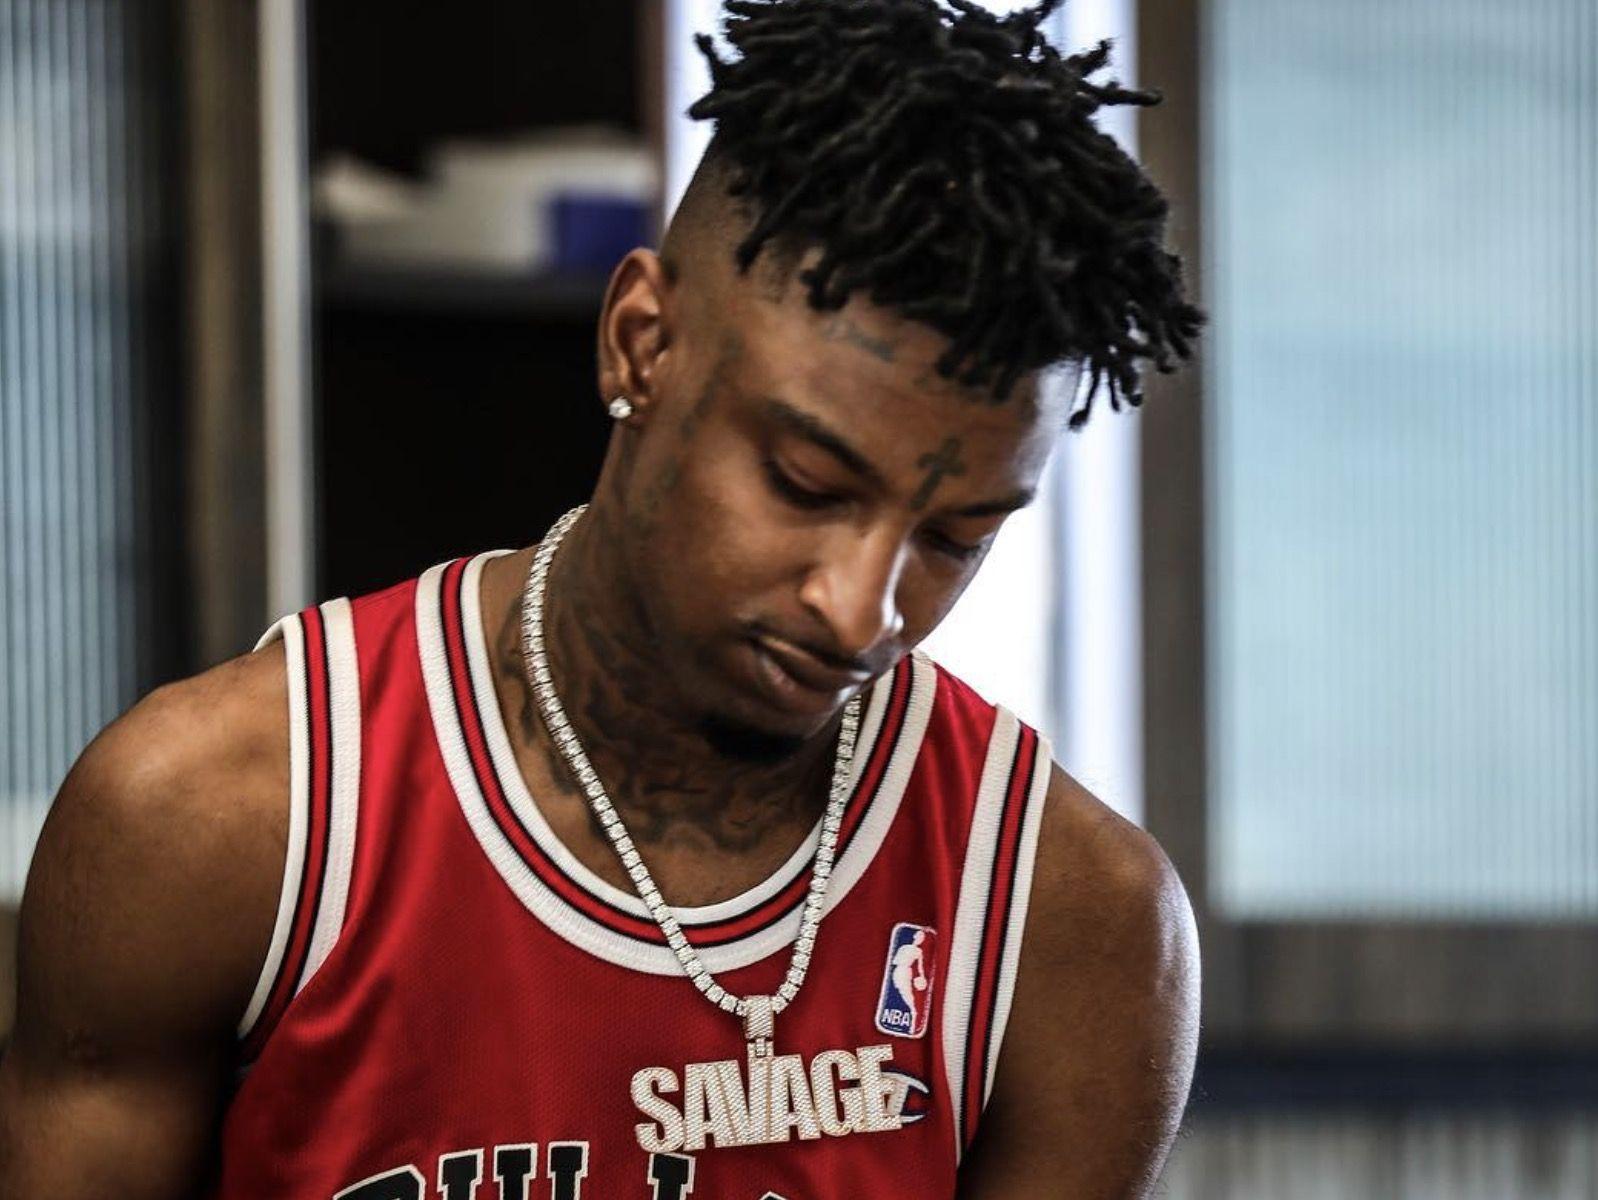 21 Savage NBA Logo - 21 Savage Reminds Us His NBA 2K18 Skills Are Not To Be Played With ...